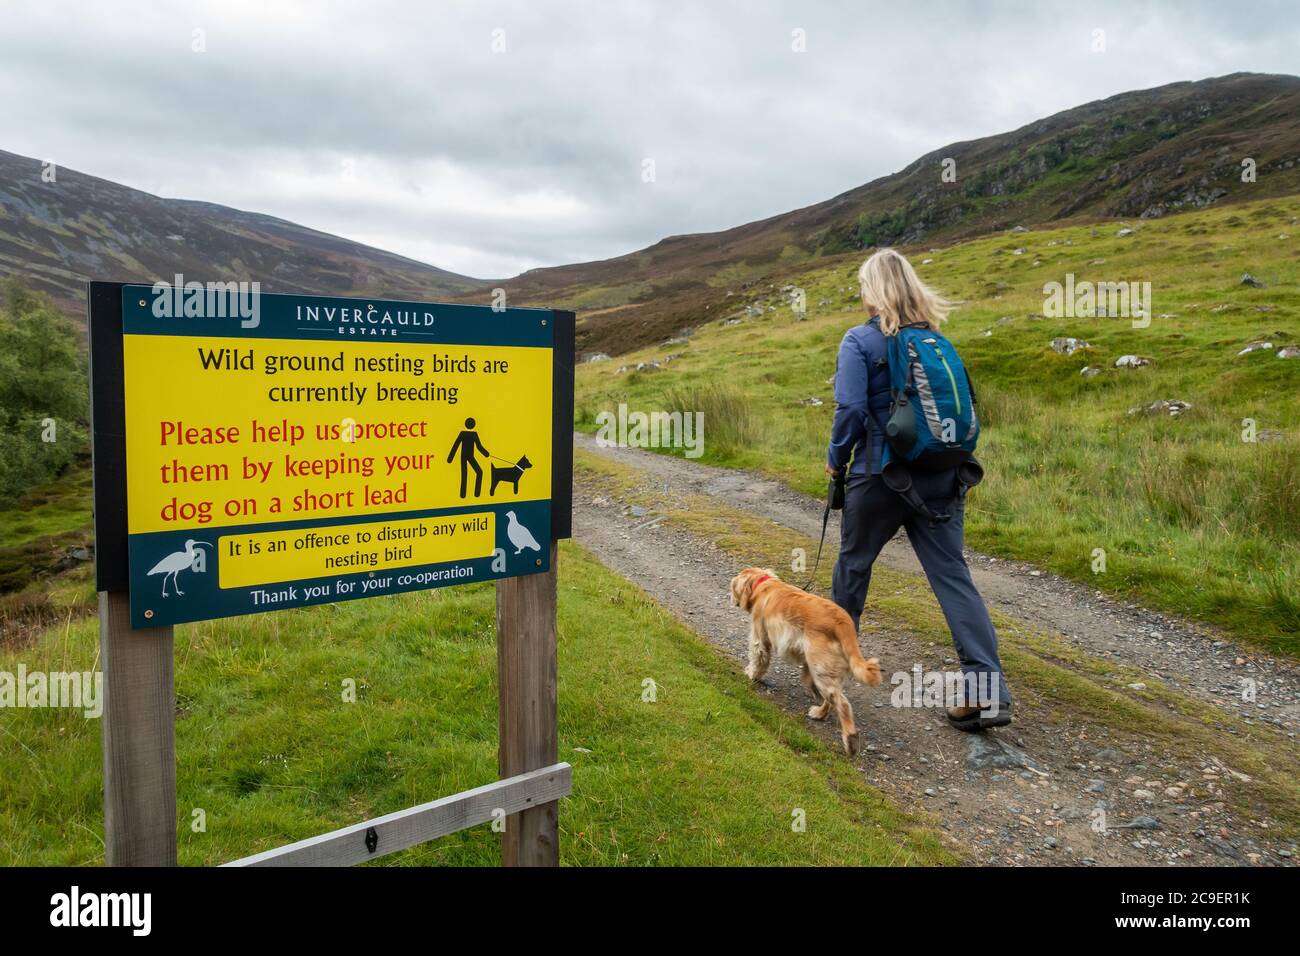 Sign telling dog walkers to keep dogs on leads due to nesting birds on the Jock's Road, Invercauld Estate near Braemar in Scotland, UK. Stock Photo